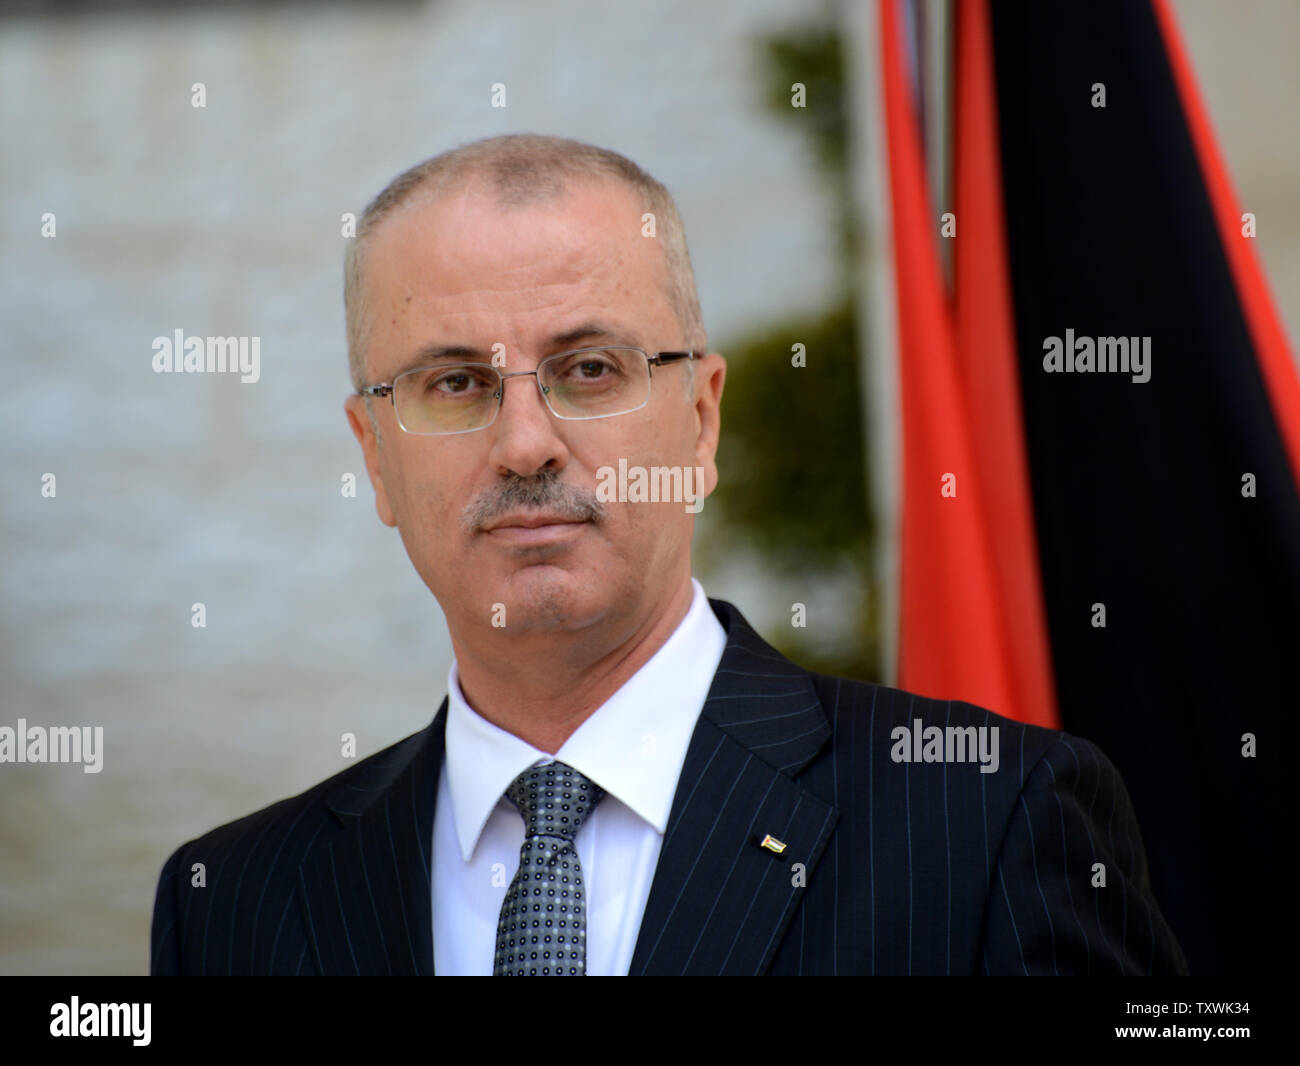 Palestinian Prime Minister Rami Hamdallah Holds A Press Conference